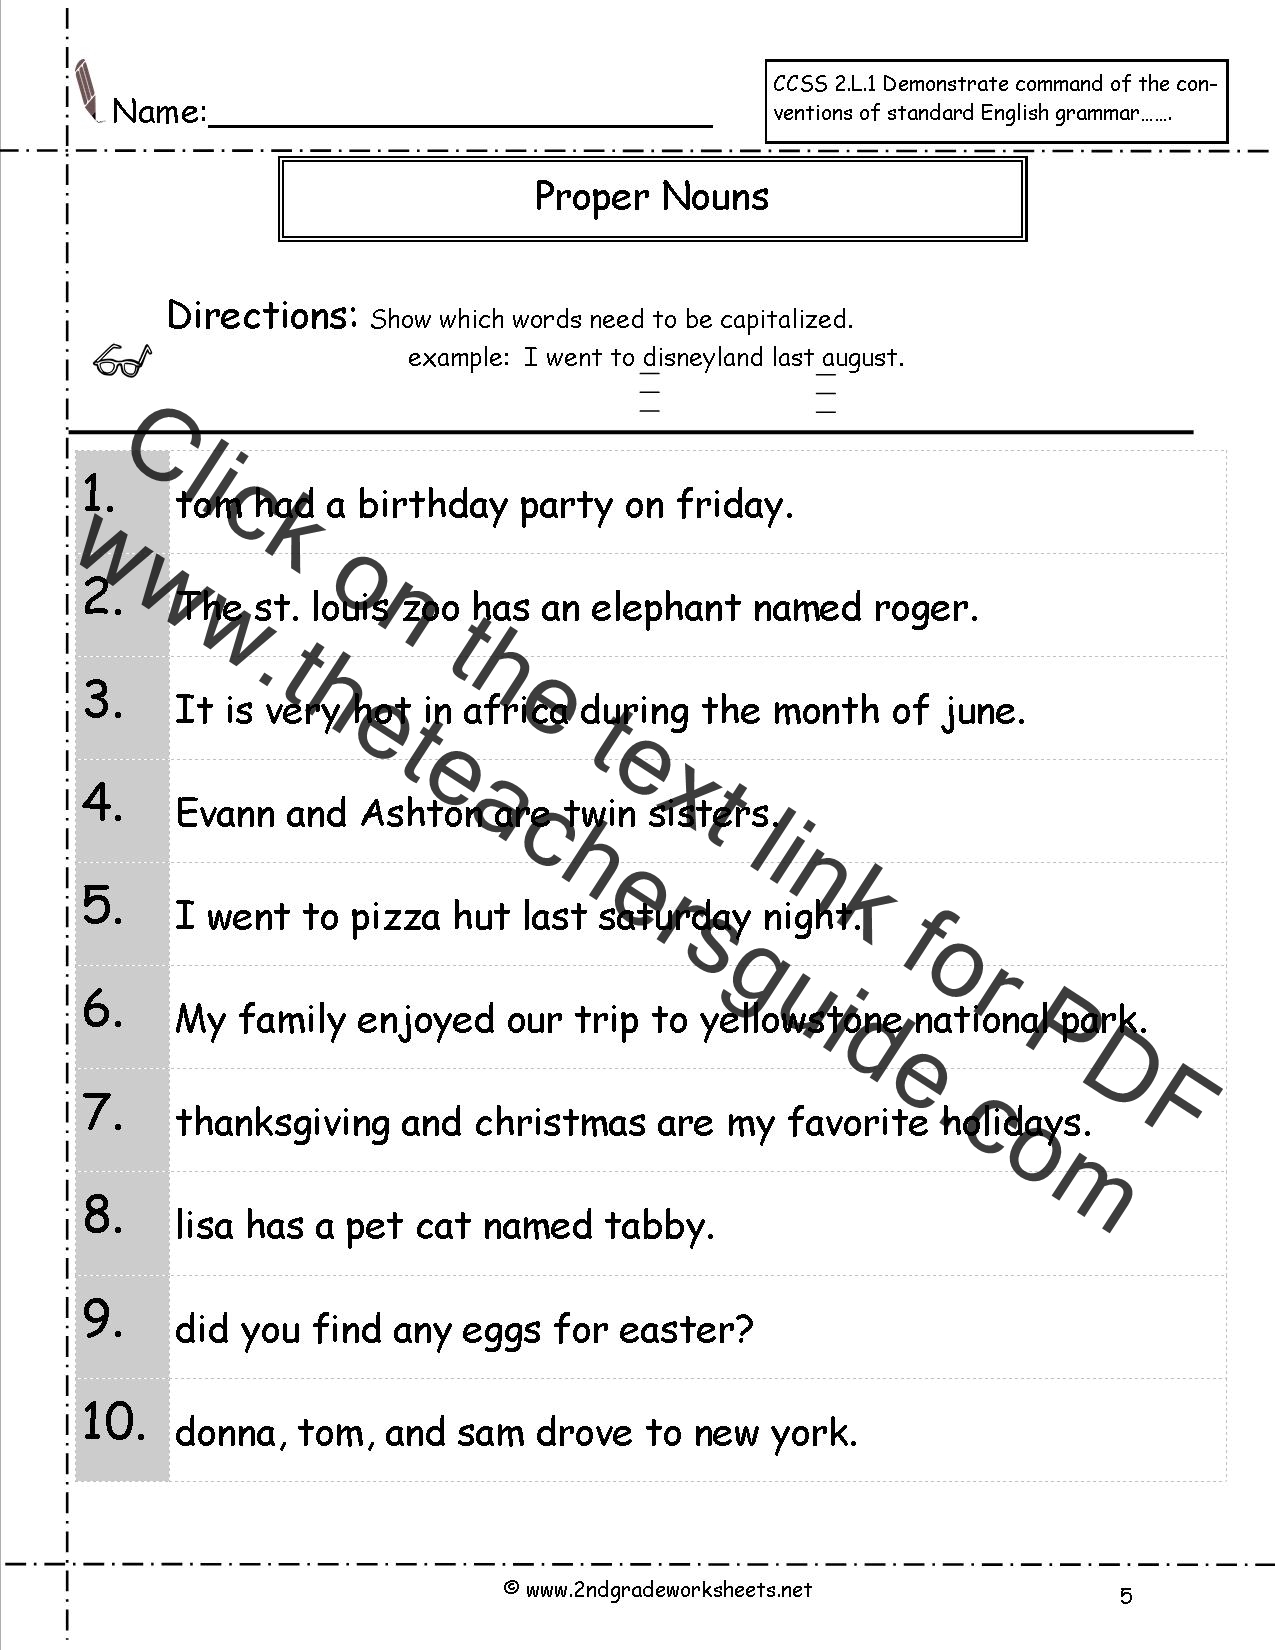 Common and Proper Nouns Worksheet Throughout Proper Nouns Worksheet 2nd Grade